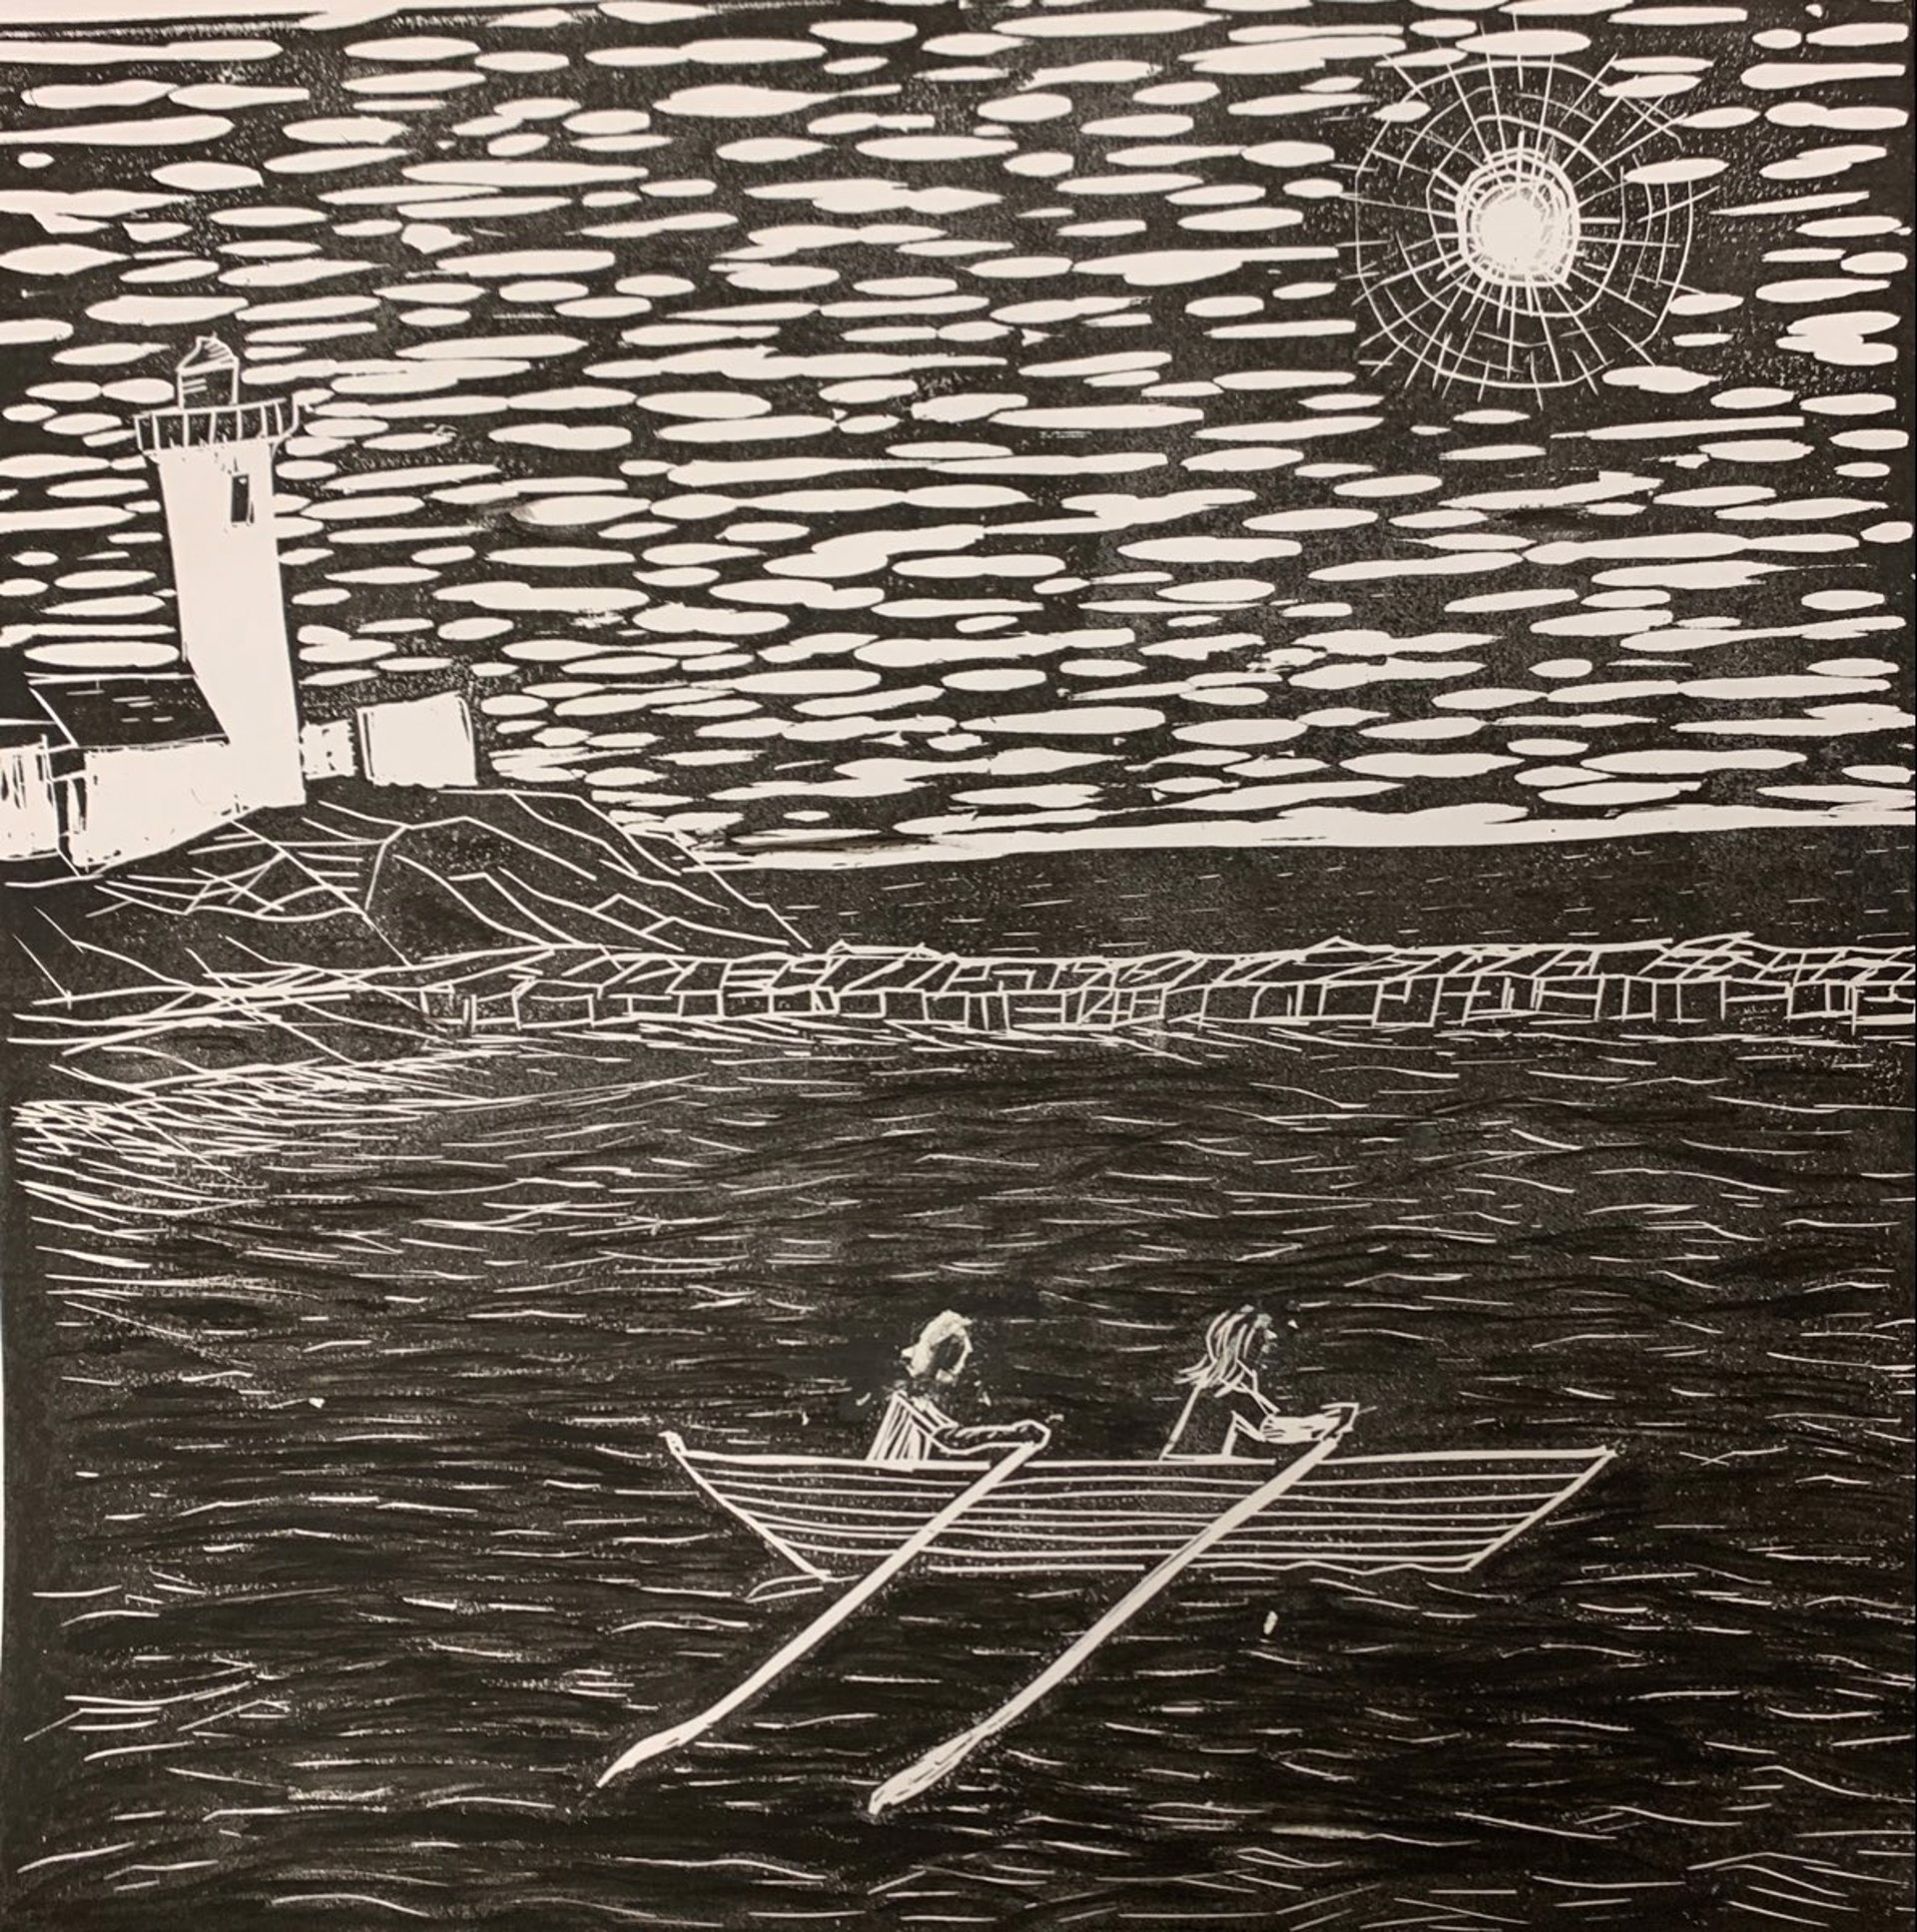 Rowing In Calm Seas by Janice Carragher Charles